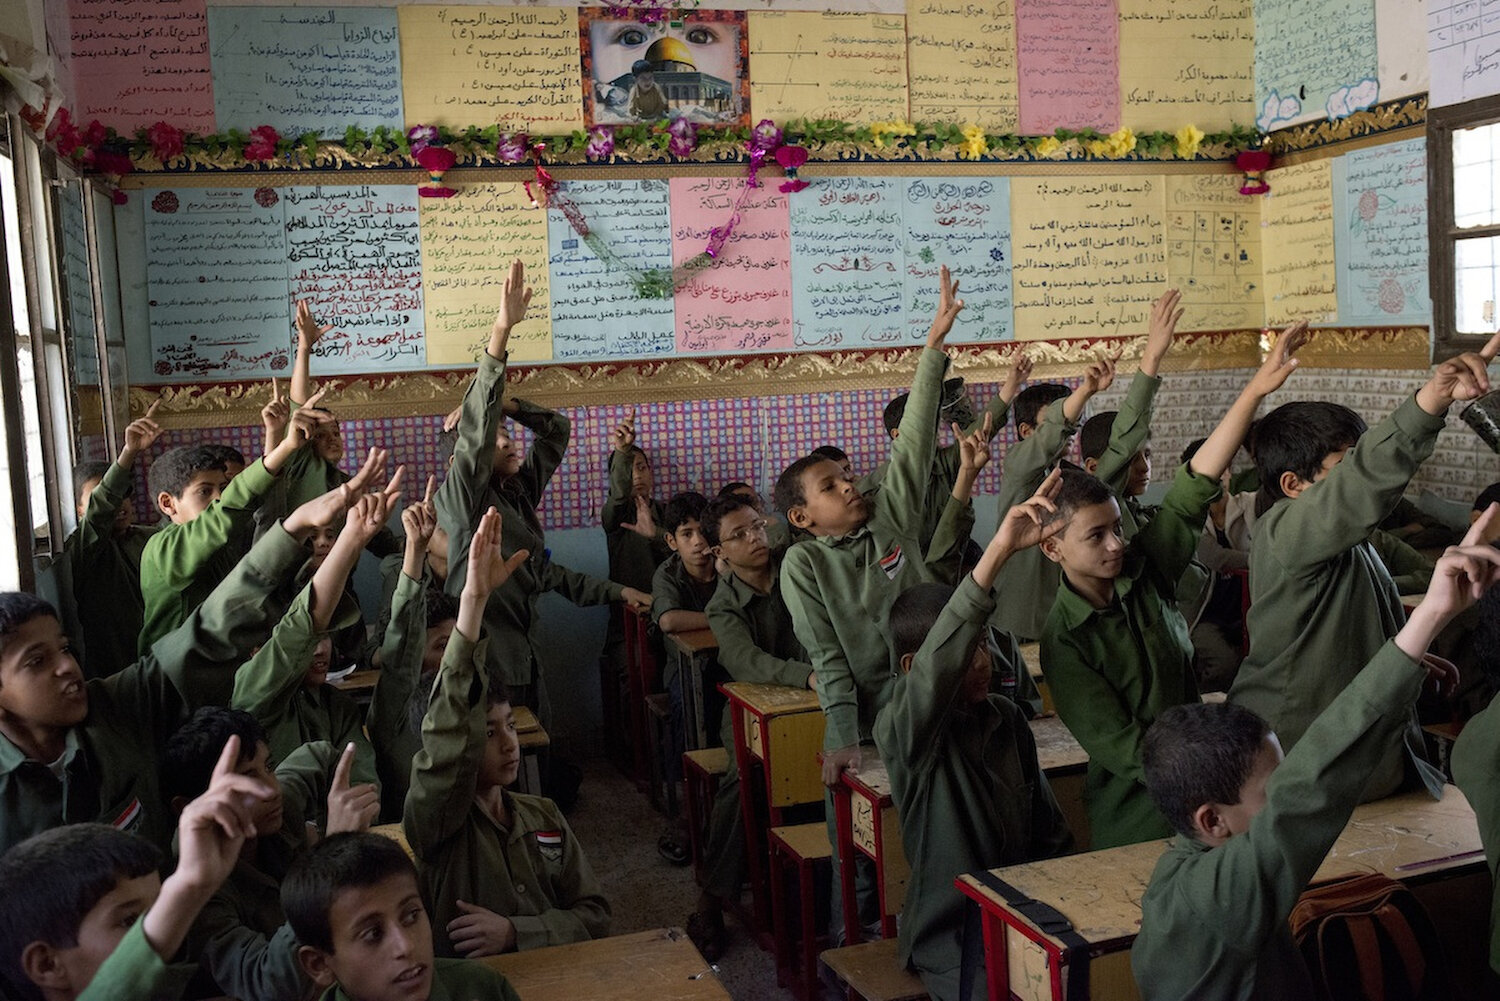  Yemeni boys in the Houthi stronghold of Sa'ada raise their hands at school. The government was rebuilt between the previous wars and the revolution. 